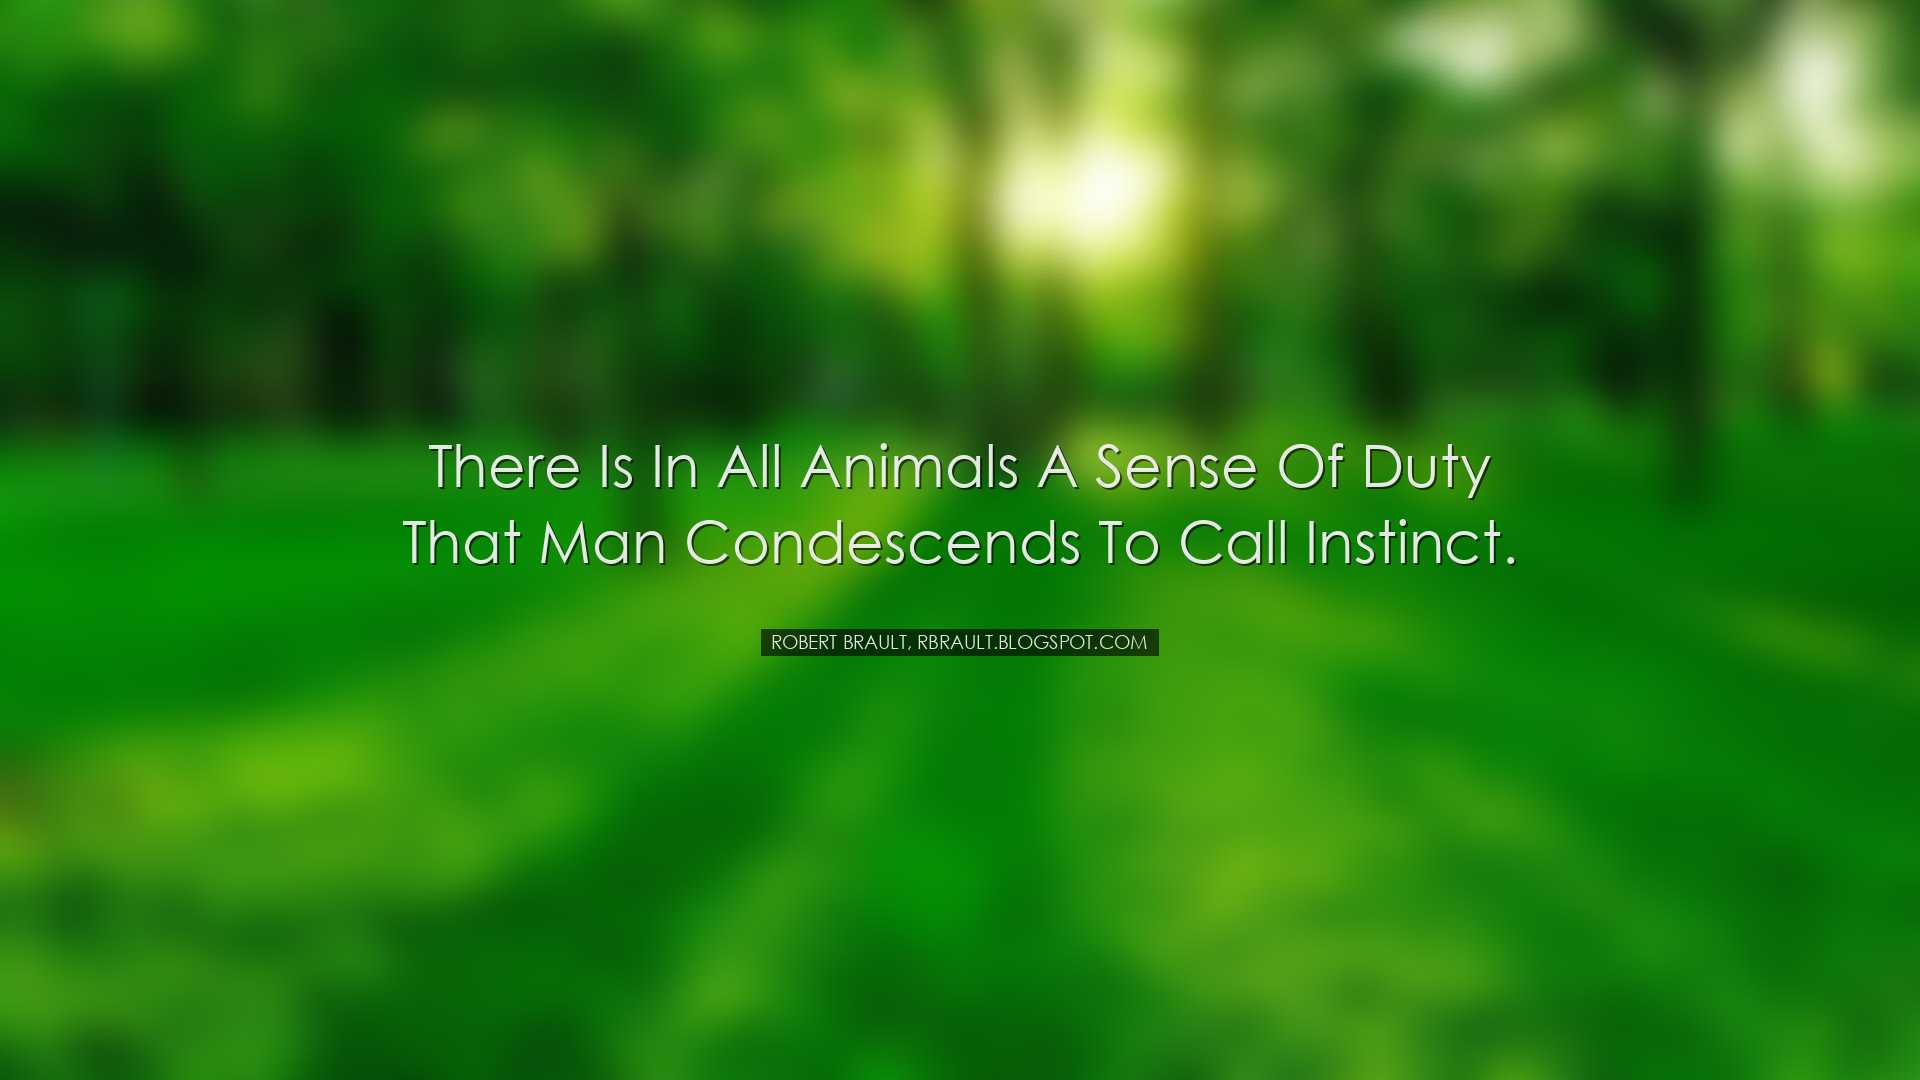 There is in all animals a sense of duty that man condescends to ca